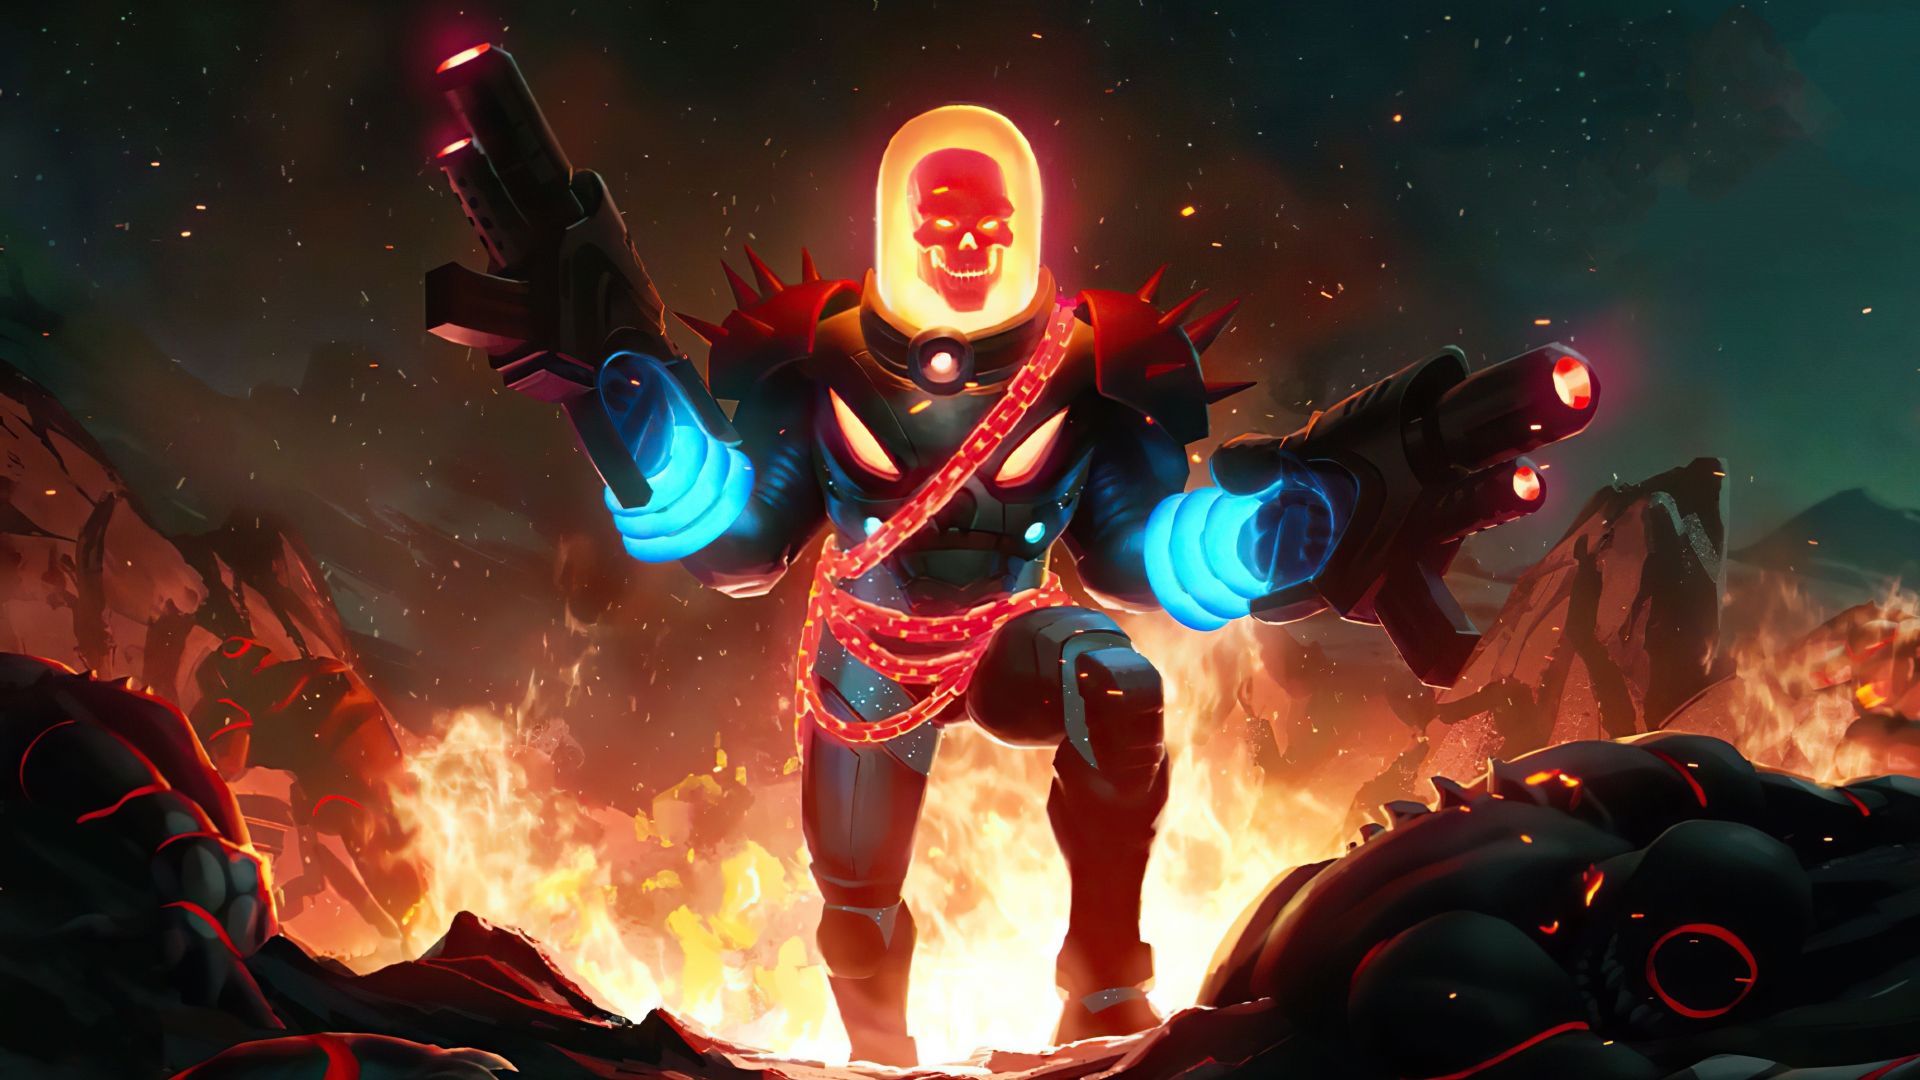 Desktop wallpaper cosmic ghost rider, marvel contest of champions, mobile game, HD image, picture, background, f4b59e